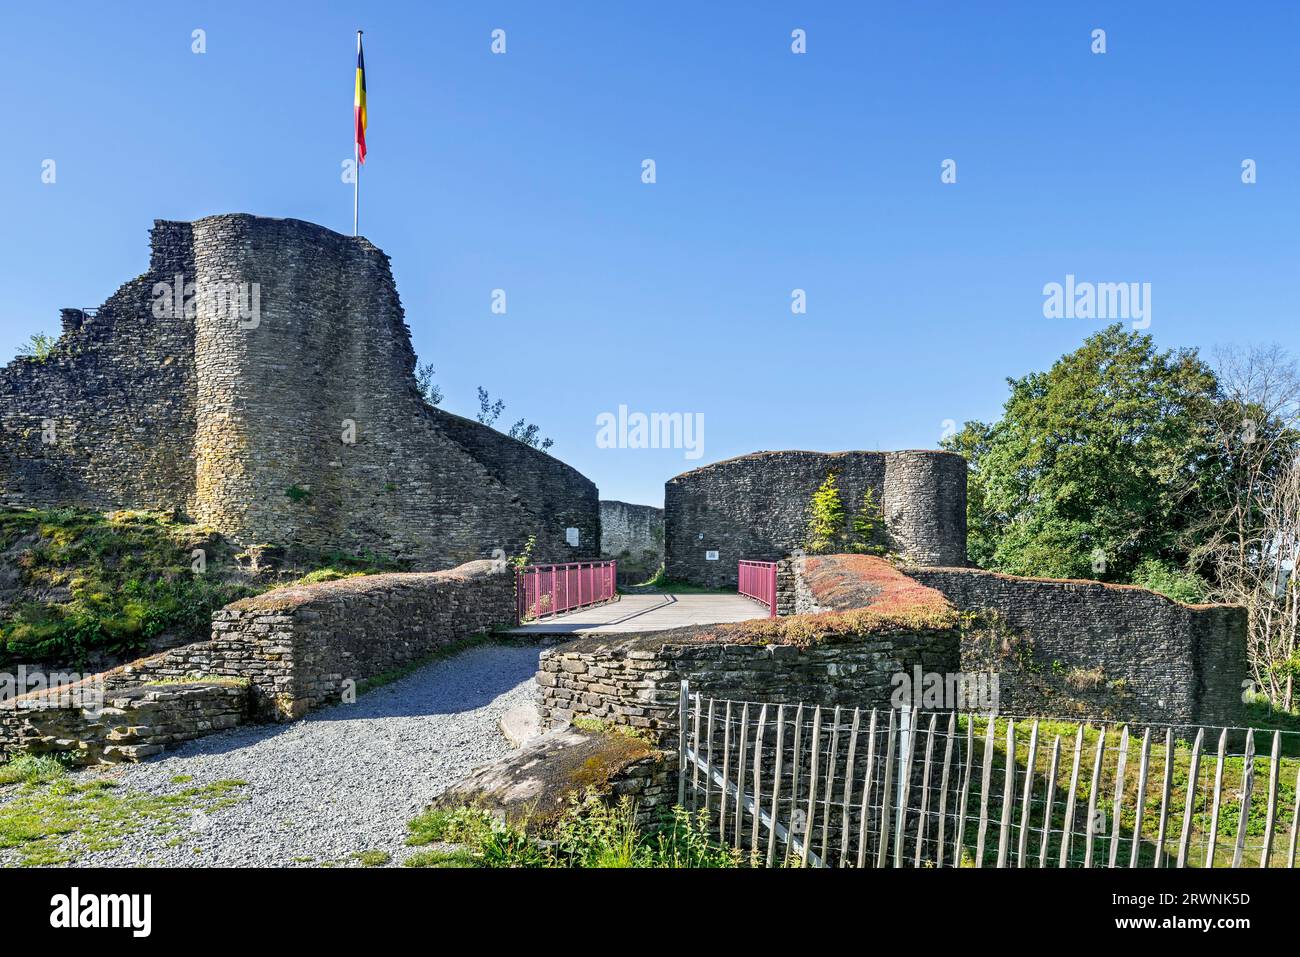 Ruines of the 13th century Château d'Herbeumont, ruined medieval castle at Herbeumont, province of Luxembourg, Belgian Ardennes, Wallonia, Belgium Stock Photo